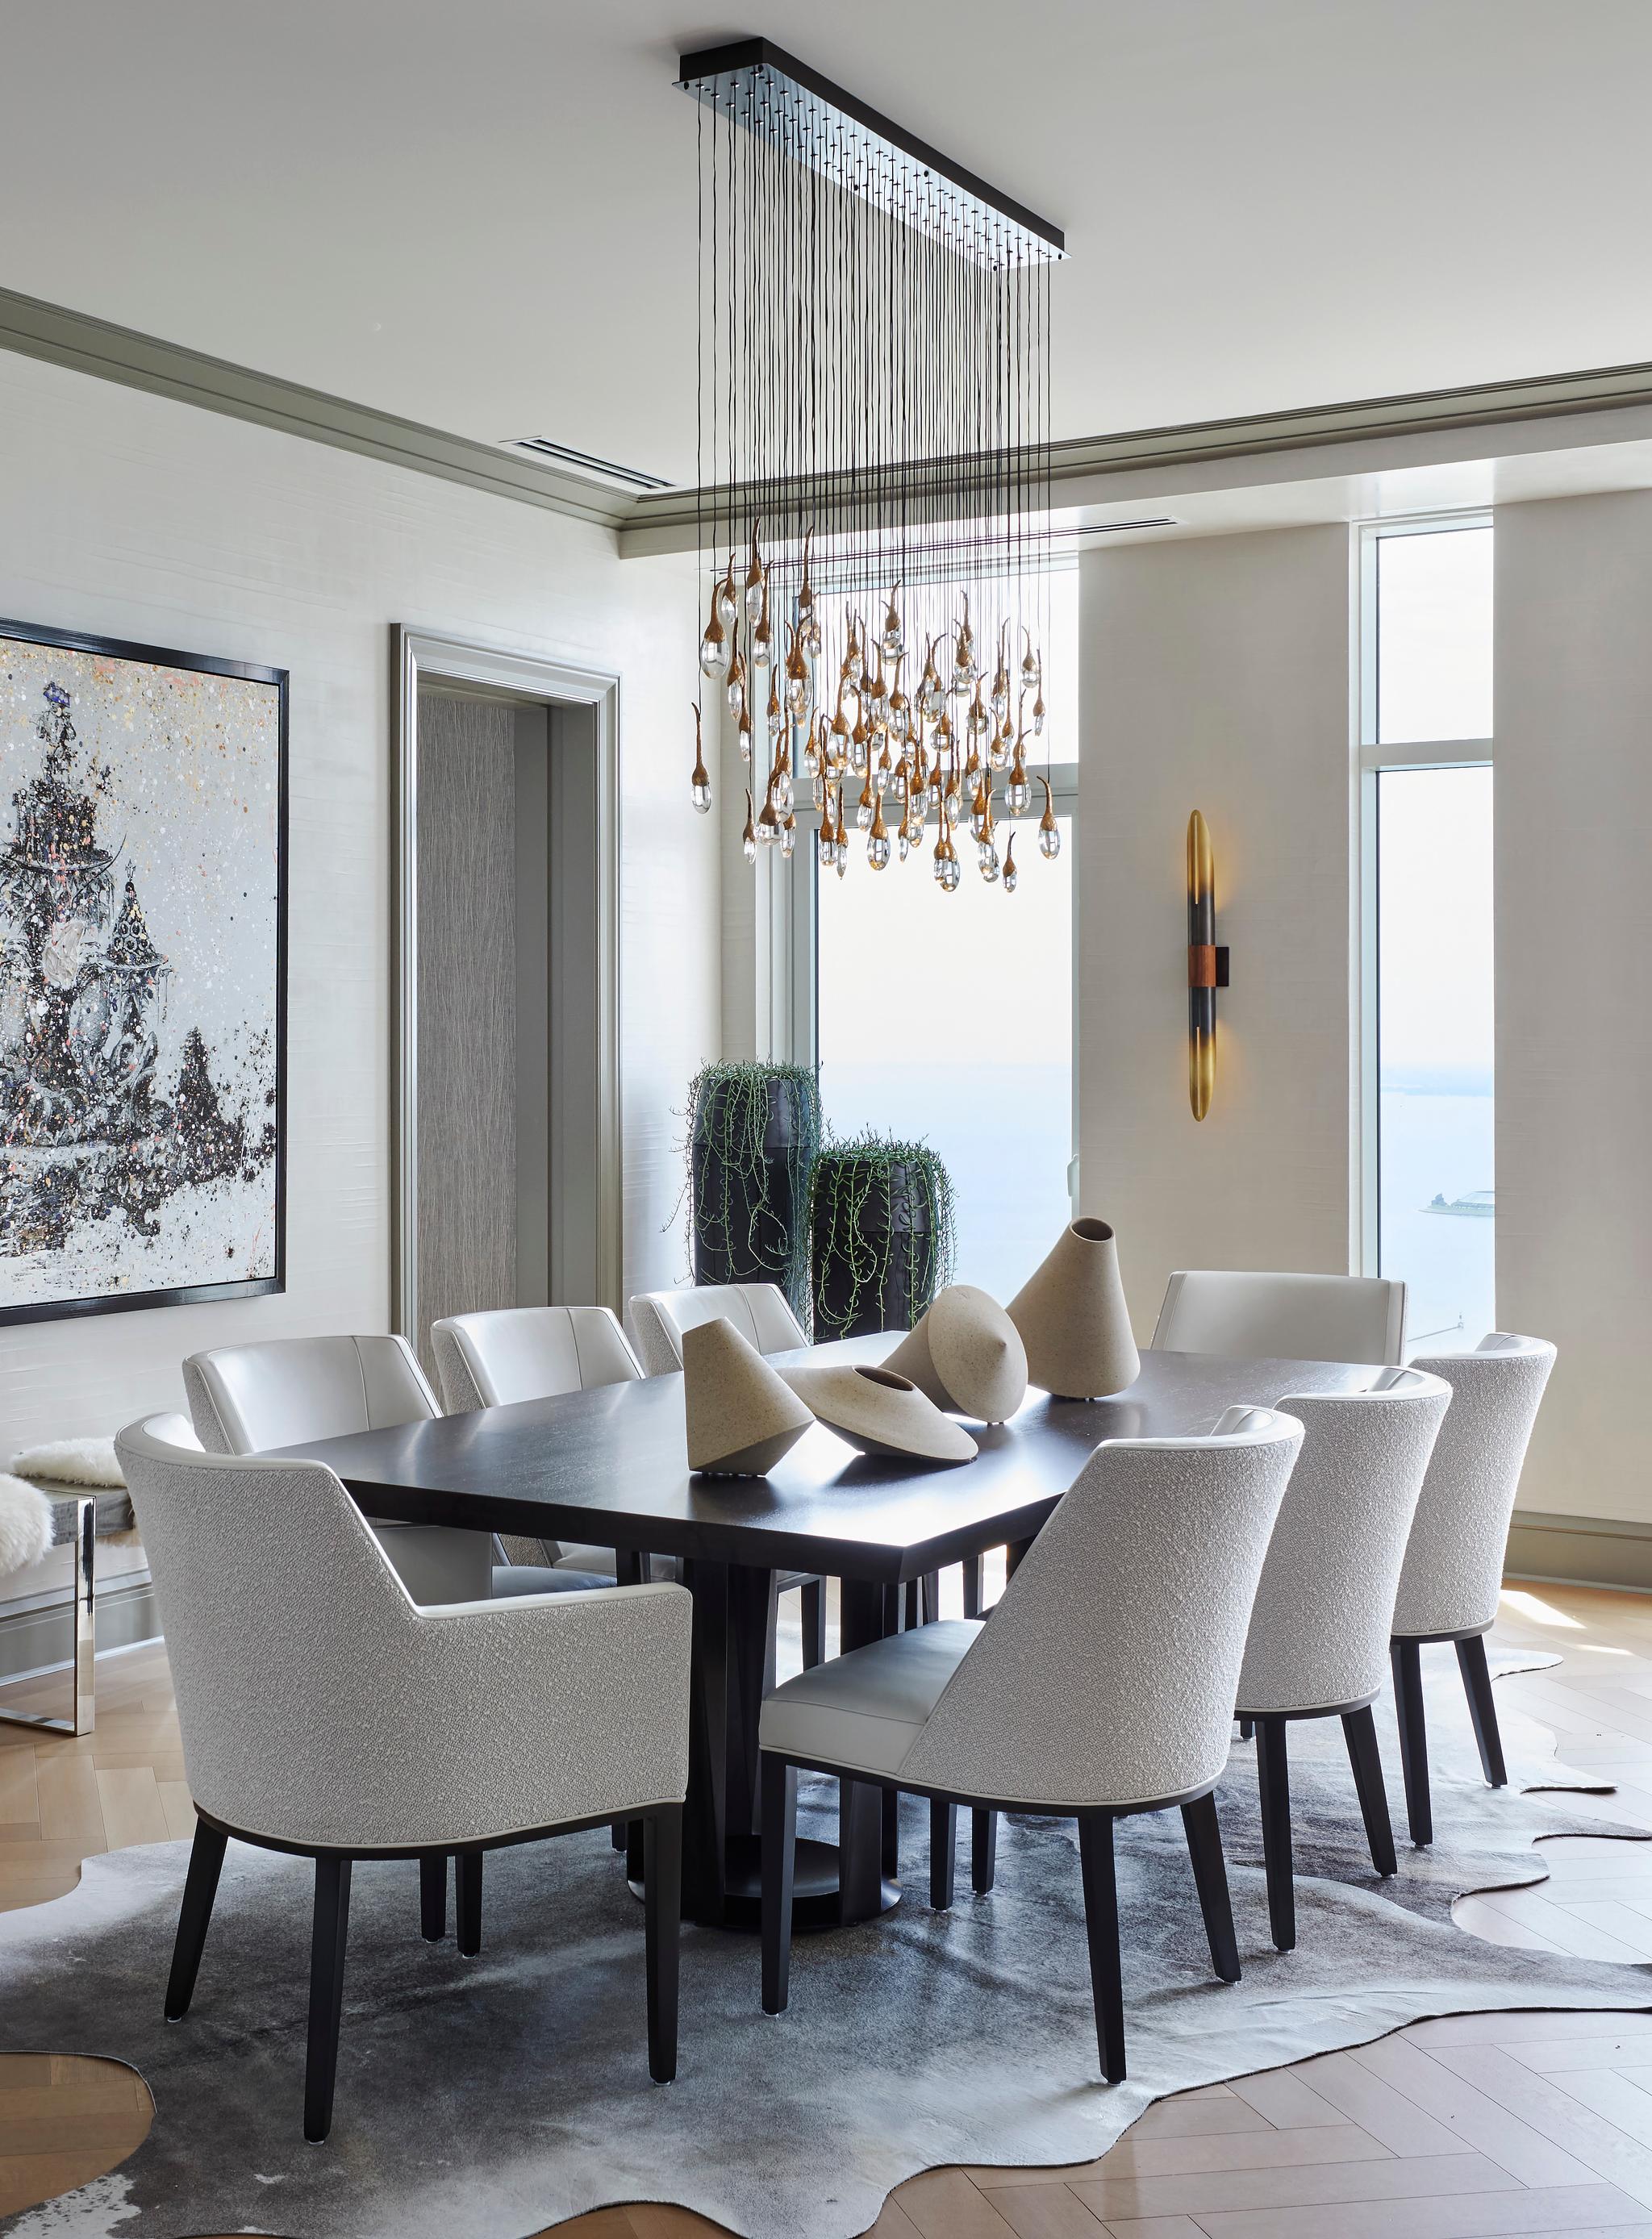 Dining Room - Classical architecture meets modern luxuty living in a Chicago high-rise